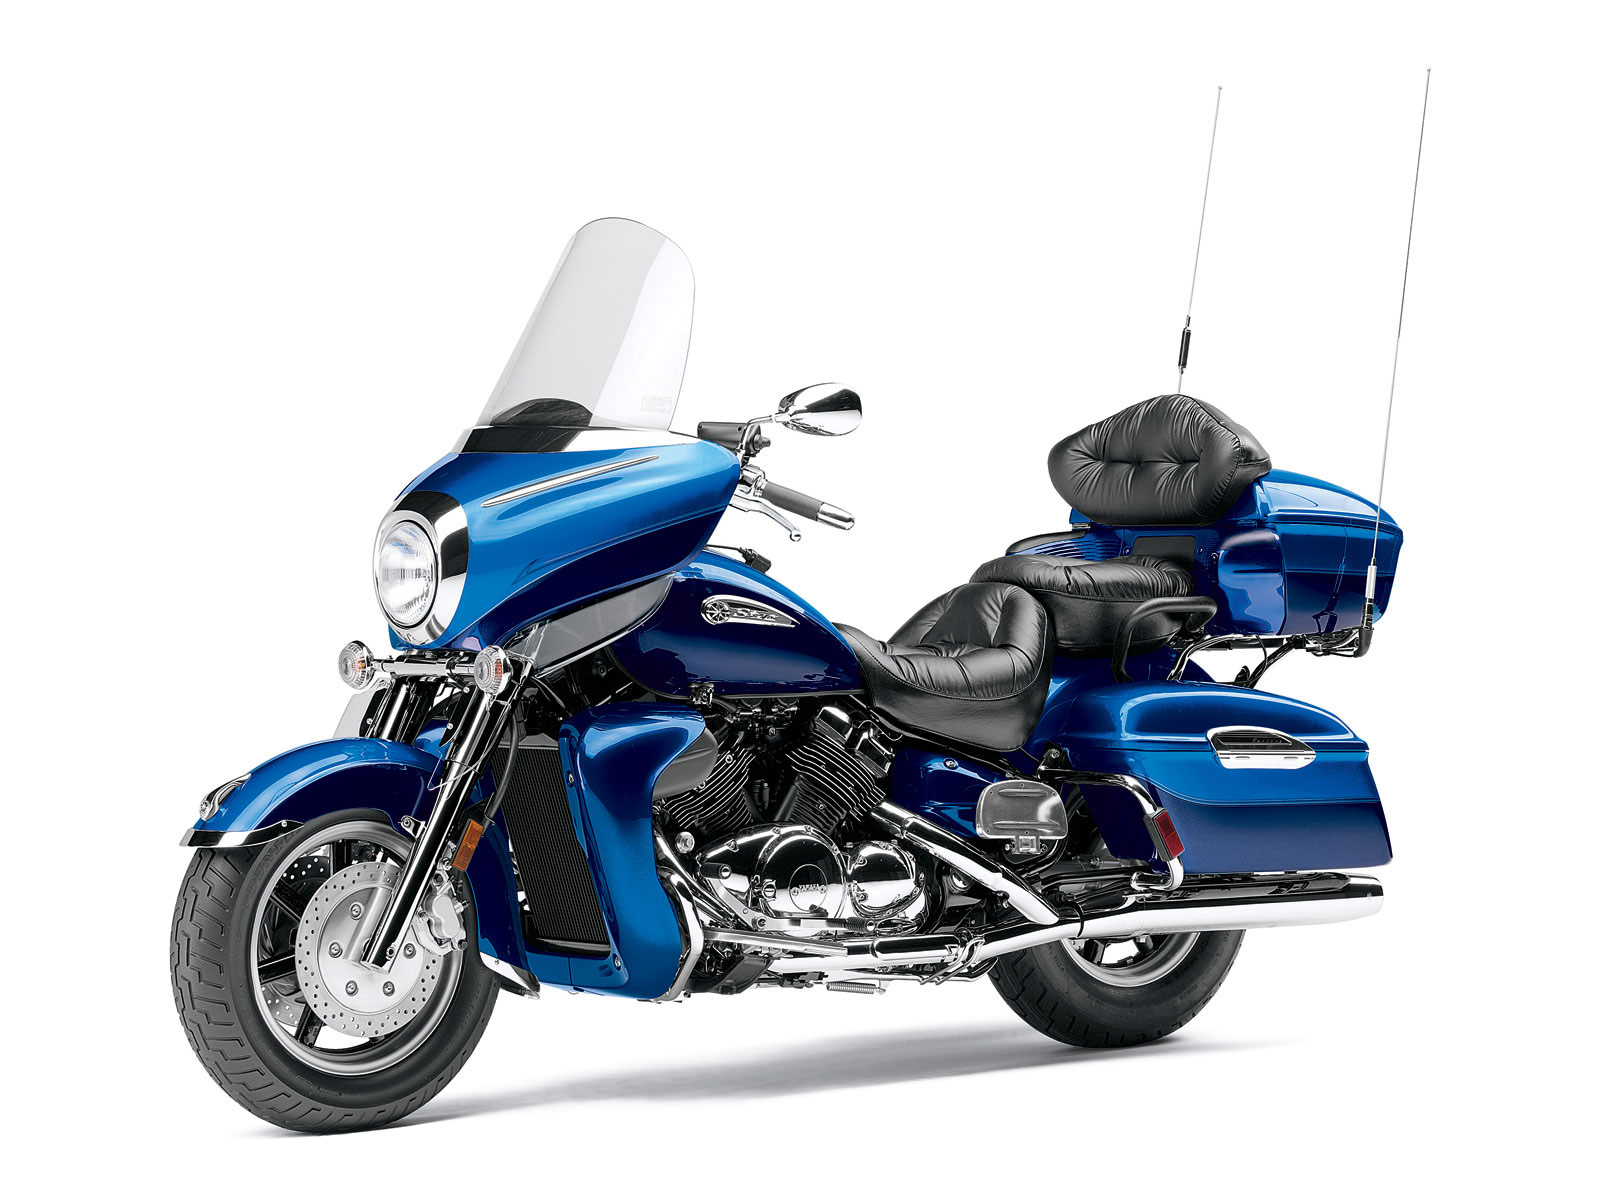 Review of Yamaha Royal Star Venture Royal Star Venture pictures, live